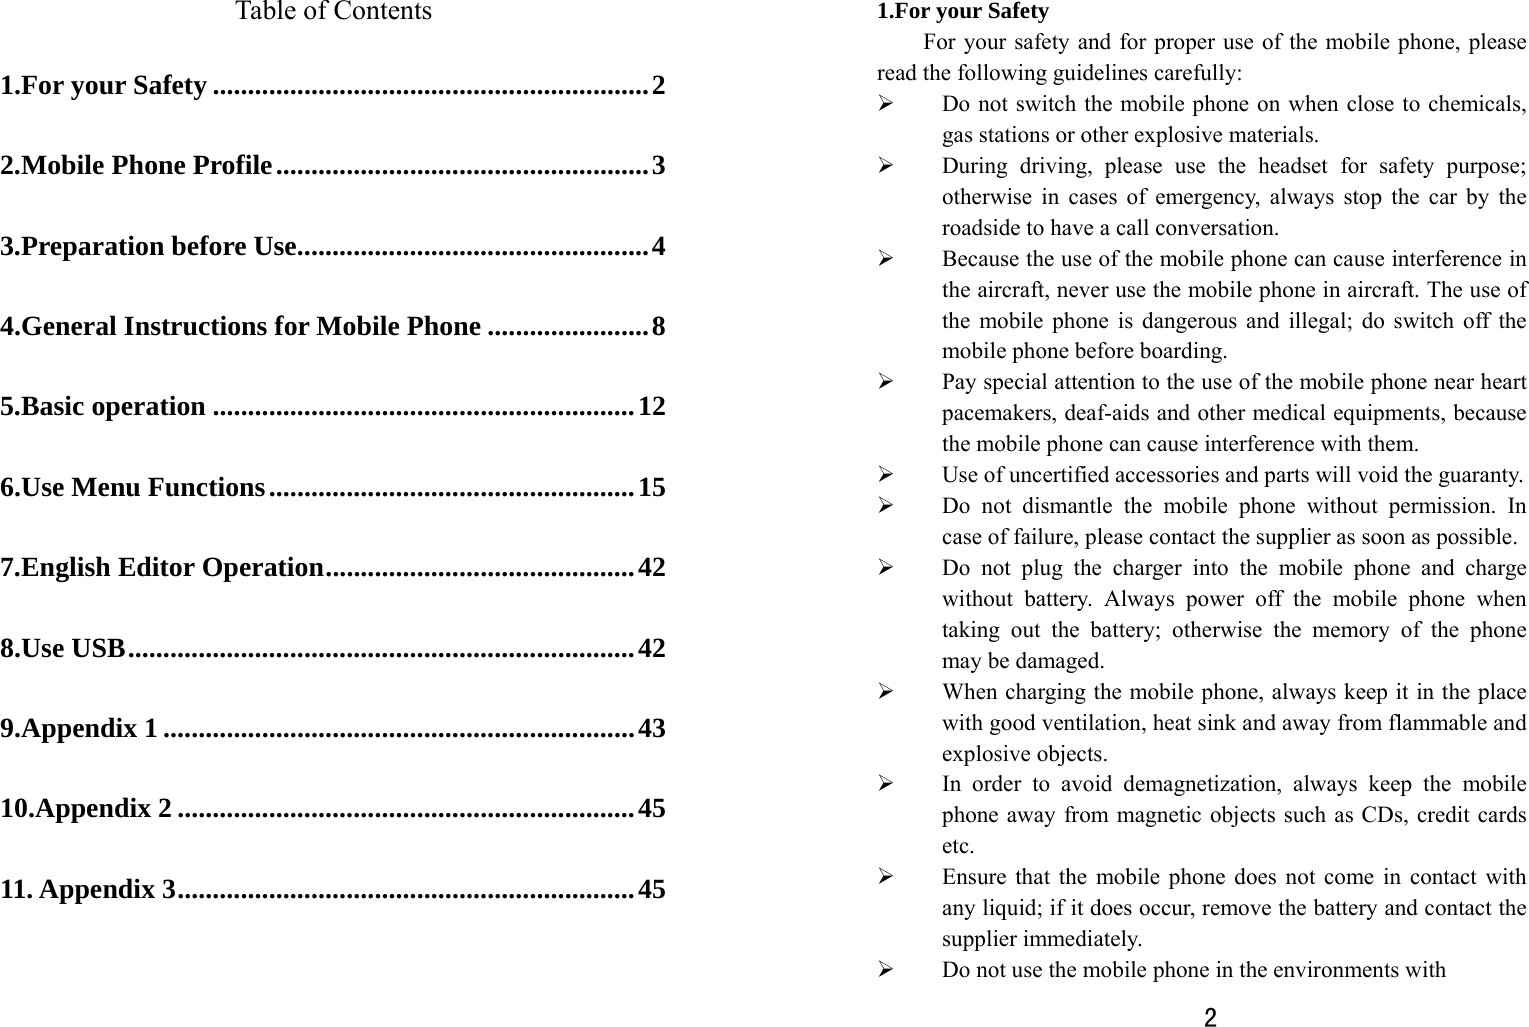   Table of Contents 1.For your Safety ..............................................................2 2.Mobile Phone Profile.....................................................3 3.Preparation before Use..................................................4 4.General Instructions for Mobile Phone .......................8 5.Basic operation ............................................................12 6.Use Menu Functions....................................................15 7.English Editor Operation............................................42 8.Use USB........................................................................42 9.Appendix 1 ...................................................................43 10.Appendix 2 .................................................................45 11. Appendix 3.................................................................45   2  1.For your Safety For your safety and for proper use of the mobile phone, please read the following guidelines carefully:   ¾ Do not switch the mobile phone on when close to chemicals, gas stations or other explosive materials. ¾ During driving, please use the headset for safety purpose; otherwise in cases of emergency, always stop the car by the roadside to have a call conversation.   ¾ Because the use of the mobile phone can cause interference in the aircraft, never use the mobile phone in aircraft. The use of the mobile phone is dangerous and illegal; do switch off the mobile phone before boarding.   ¾ Pay special attention to the use of the mobile phone near heart pacemakers, deaf-aids and other medical equipments, because the mobile phone can cause interference with them.   ¾ Use of uncertified accessories and parts will void the guaranty.   ¾ Do not dismantle the mobile phone without permission. In case of failure, please contact the supplier as soon as possible.   ¾ Do not plug the charger into the mobile phone and charge without battery. Always power off the mobile phone when taking out the battery; otherwise the memory of the phone may be damaged.   ¾ When charging the mobile phone, always keep it in the place with good ventilation, heat sink and away from flammable and explosive objects.   ¾ In order to avoid demagnetization, always keep the mobile phone away from magnetic objects such as CDs, credit cards etc.  ¾ Ensure that the mobile phone does not come in contact with any liquid; if it does occur, remove the battery and contact the supplier immediately.   ¾ Do not use the mobile phone in the environments with